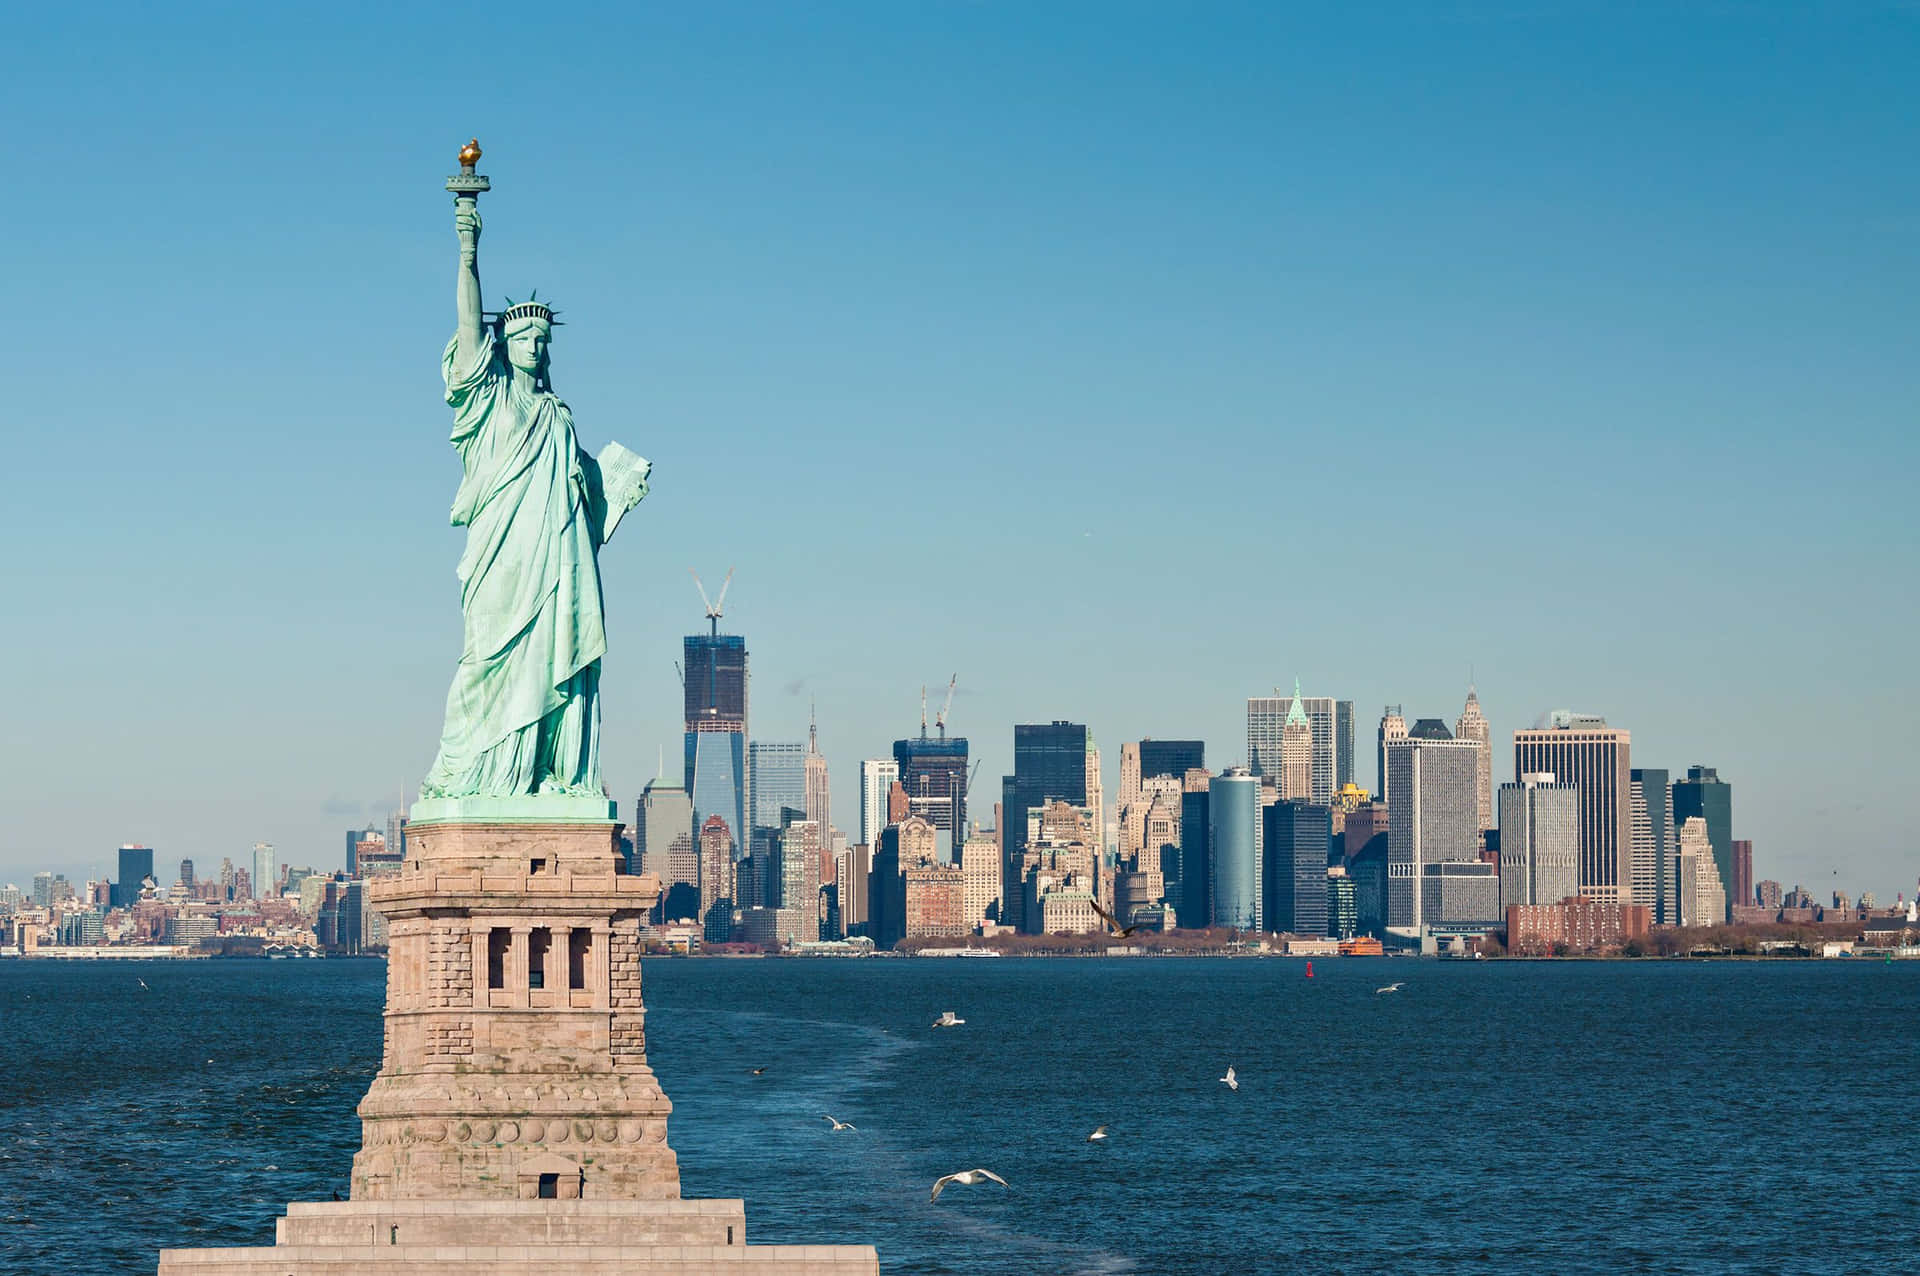 600 Statue of Liberty Pictures  Images HD  Pixabay